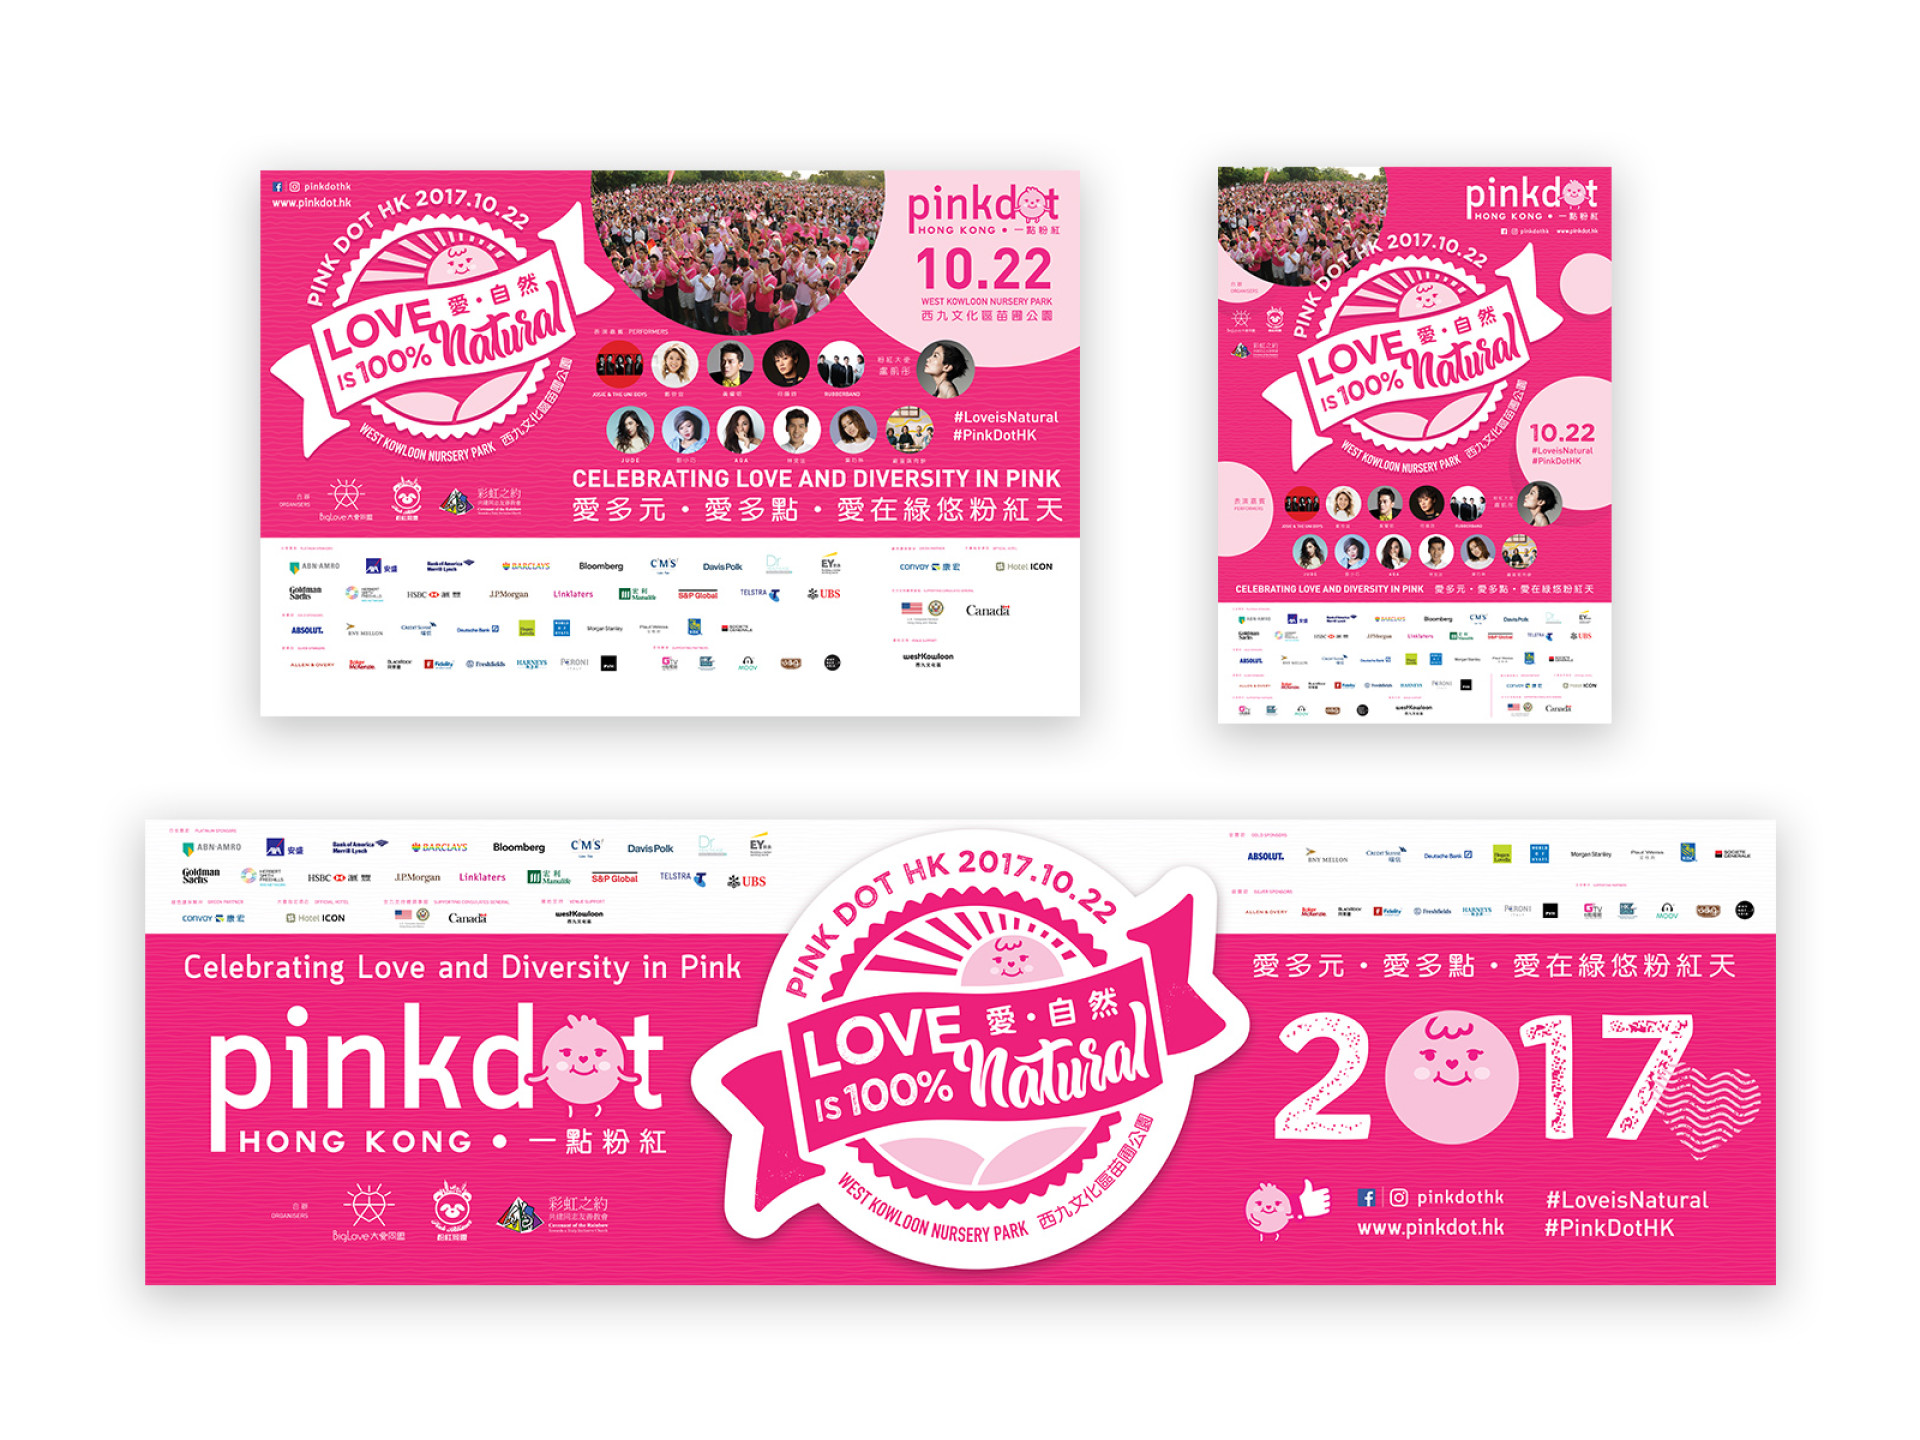 Pink Dot Hong Kong event, poster, backdrop, hoarding, advertisement design and production